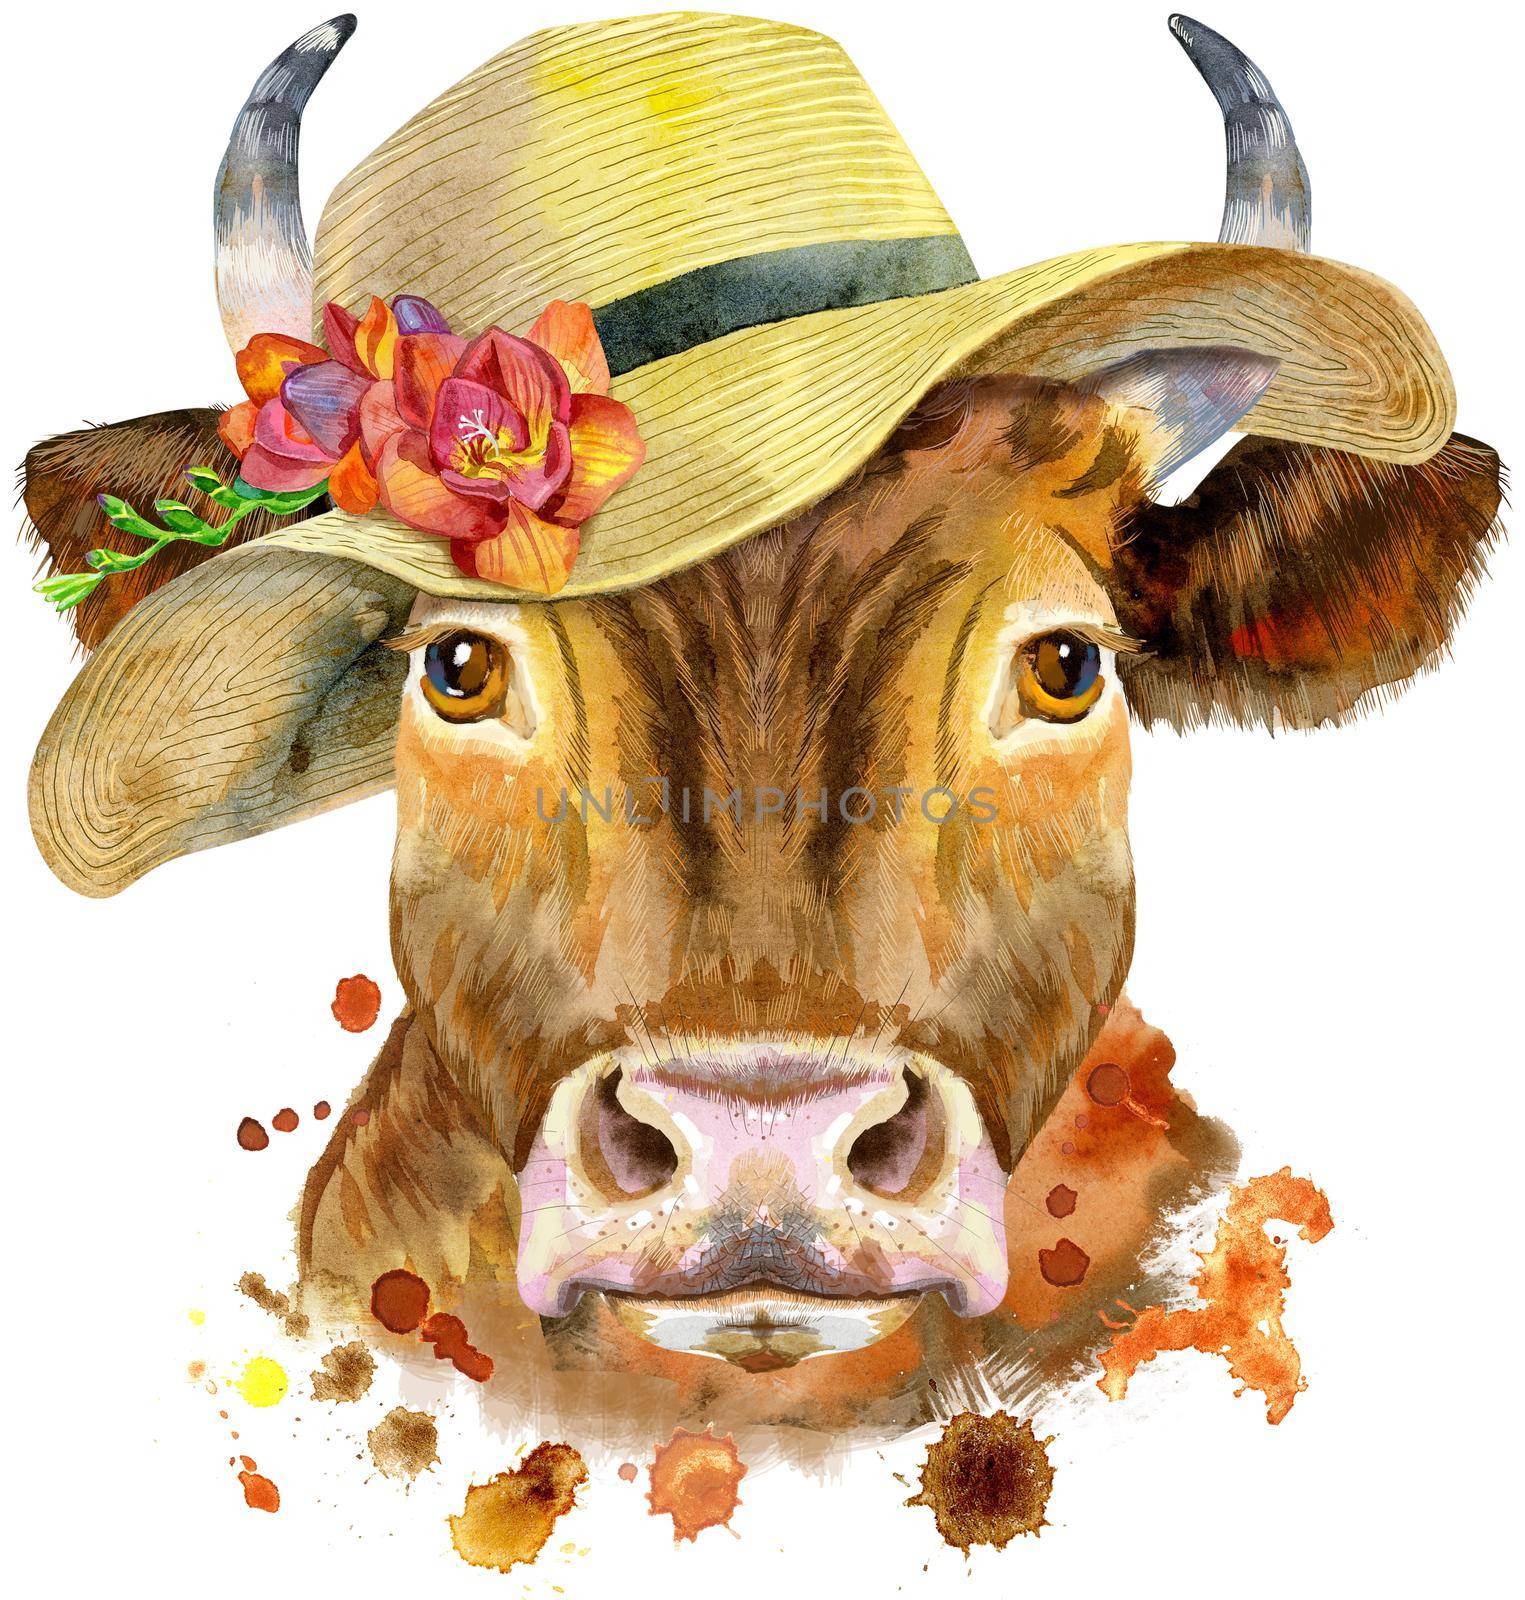 Bull watercolor graphics. Bull in summer hat with freesia animal illustration with splash watercolor textured background.